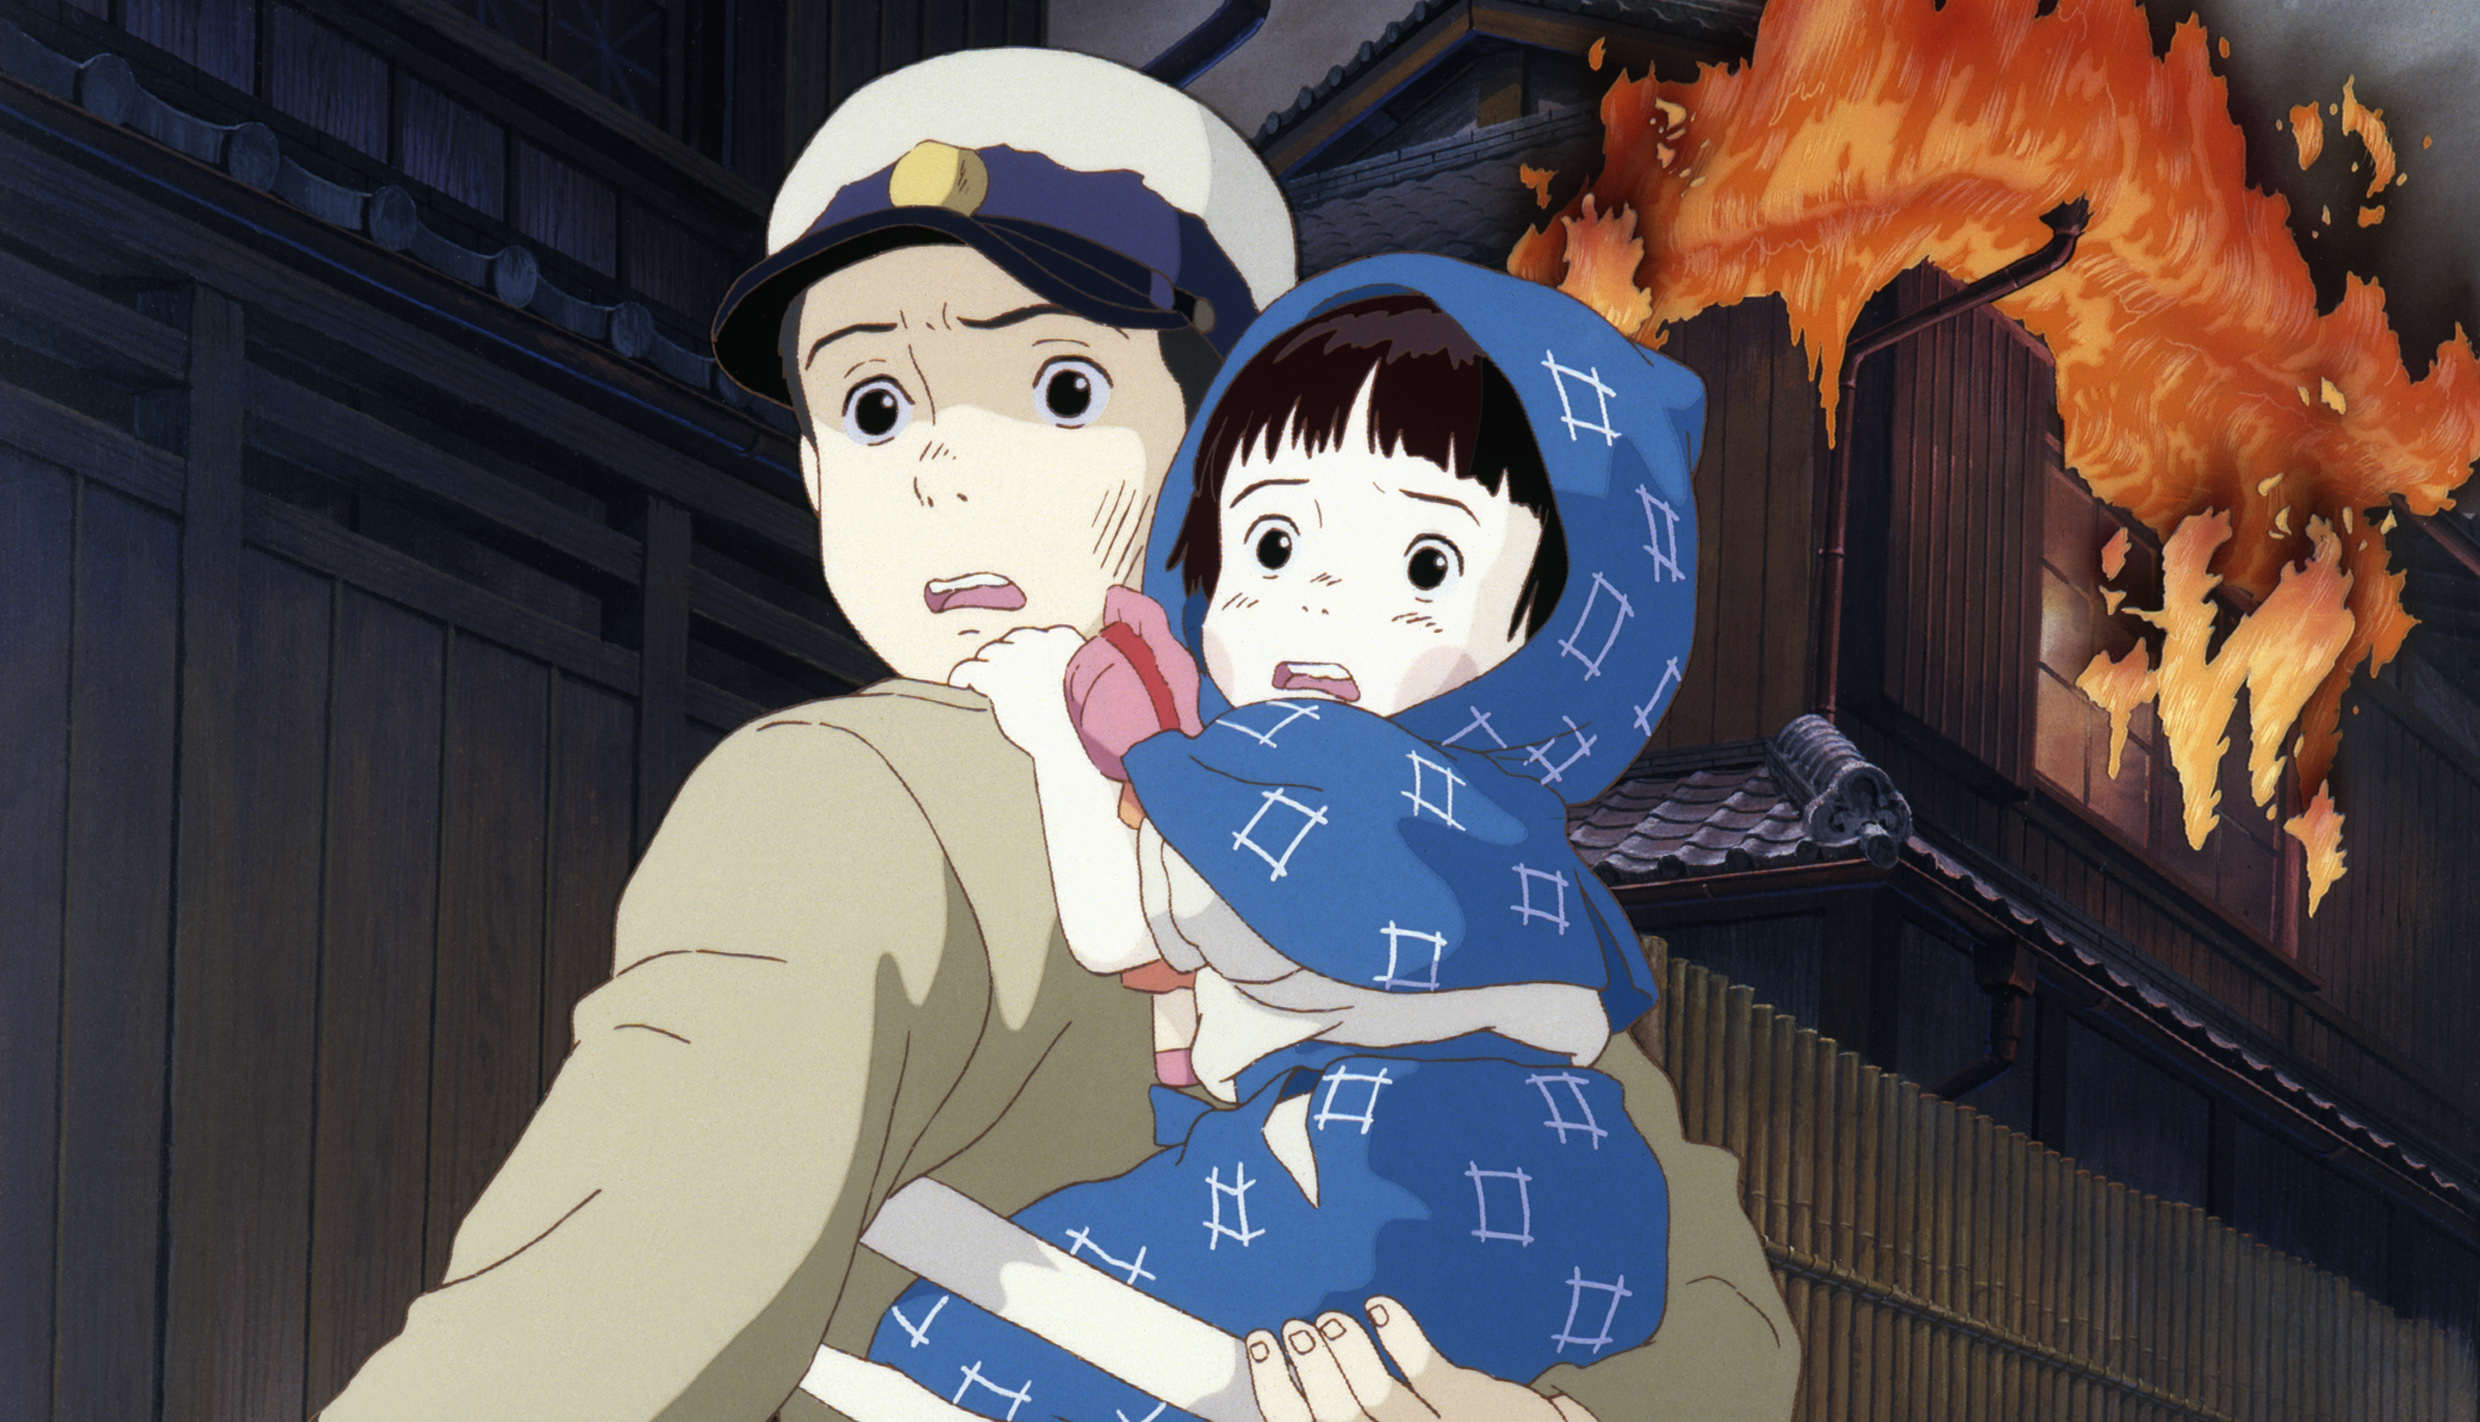 Grave of the Fireflies - Movie - Where To Watch